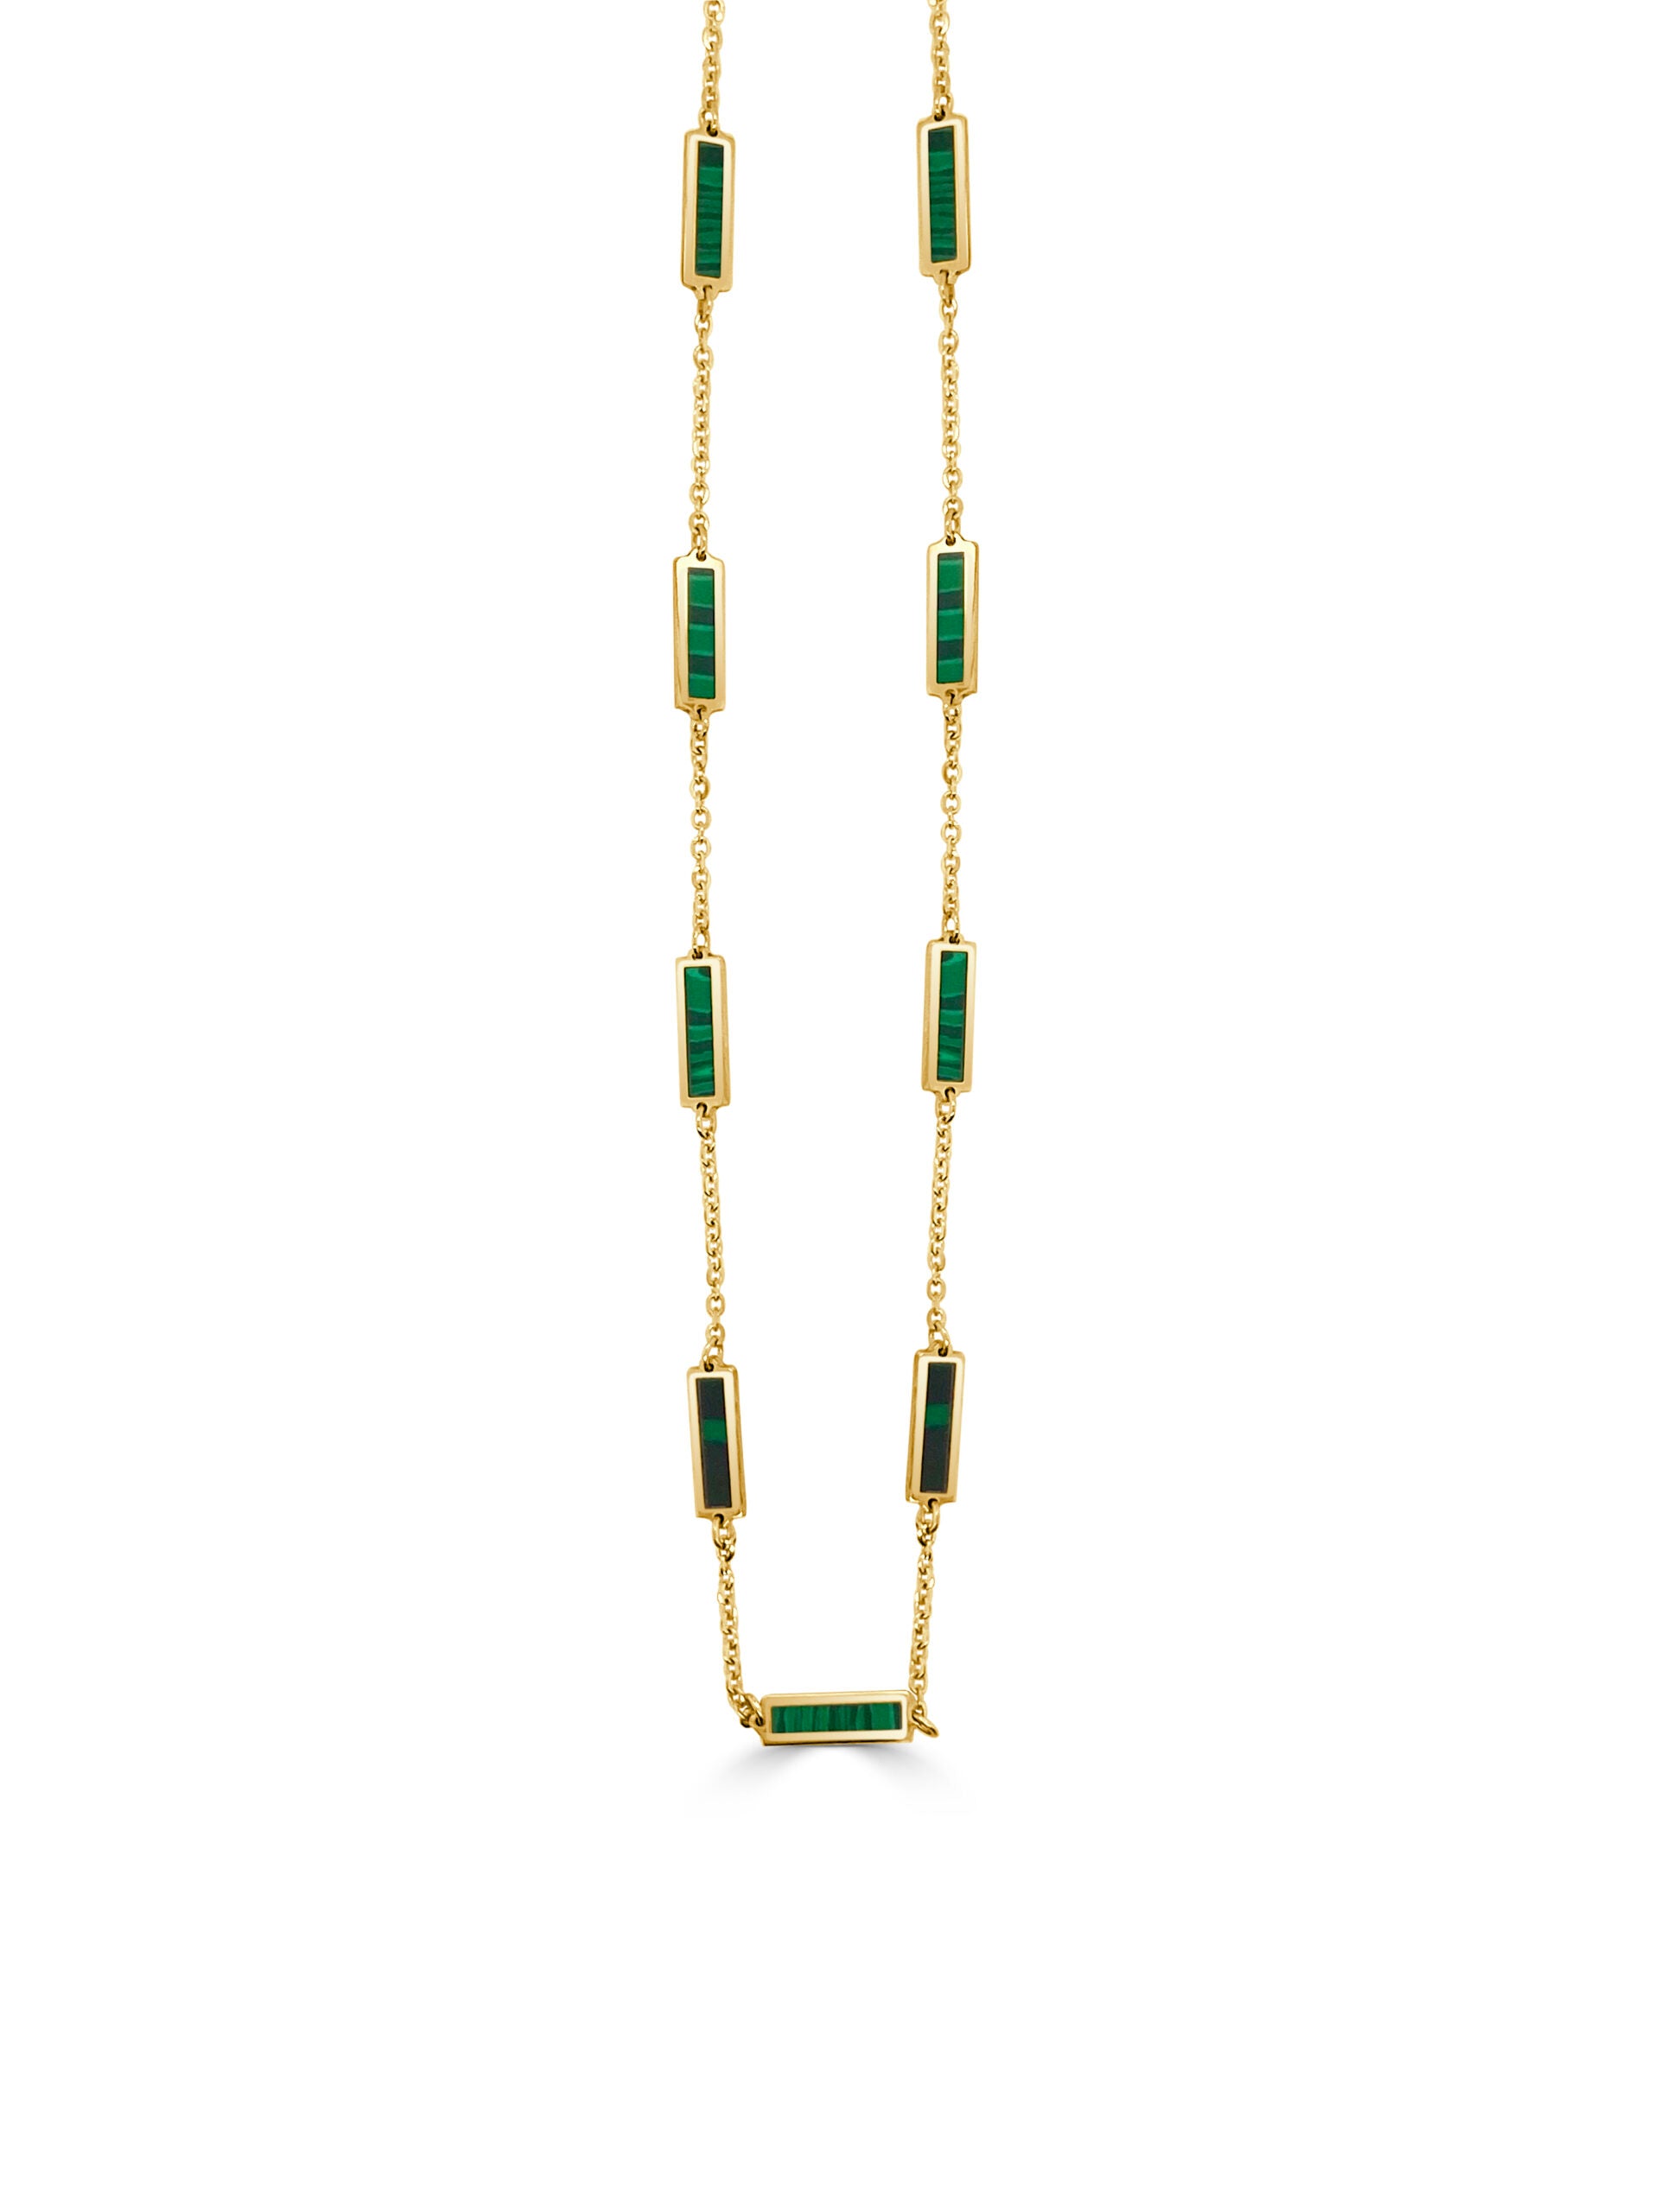 Frederic Sage Yellow Gold Malachite Station Necklace - Colored Stone Necklace